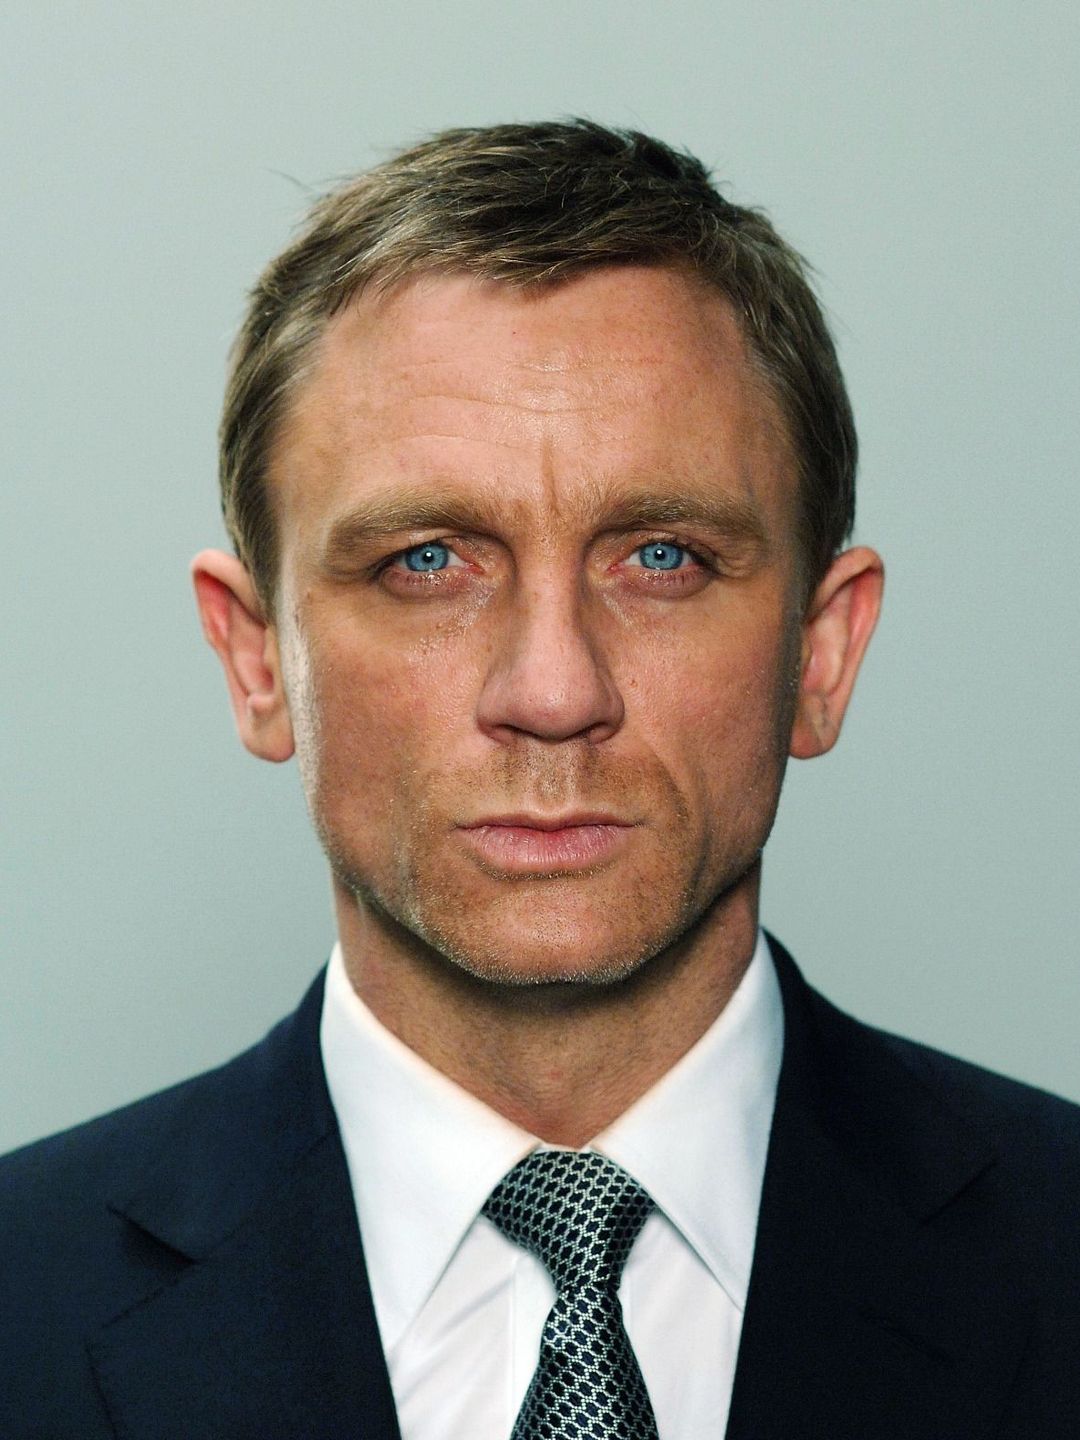 Daniel Craig who is his father